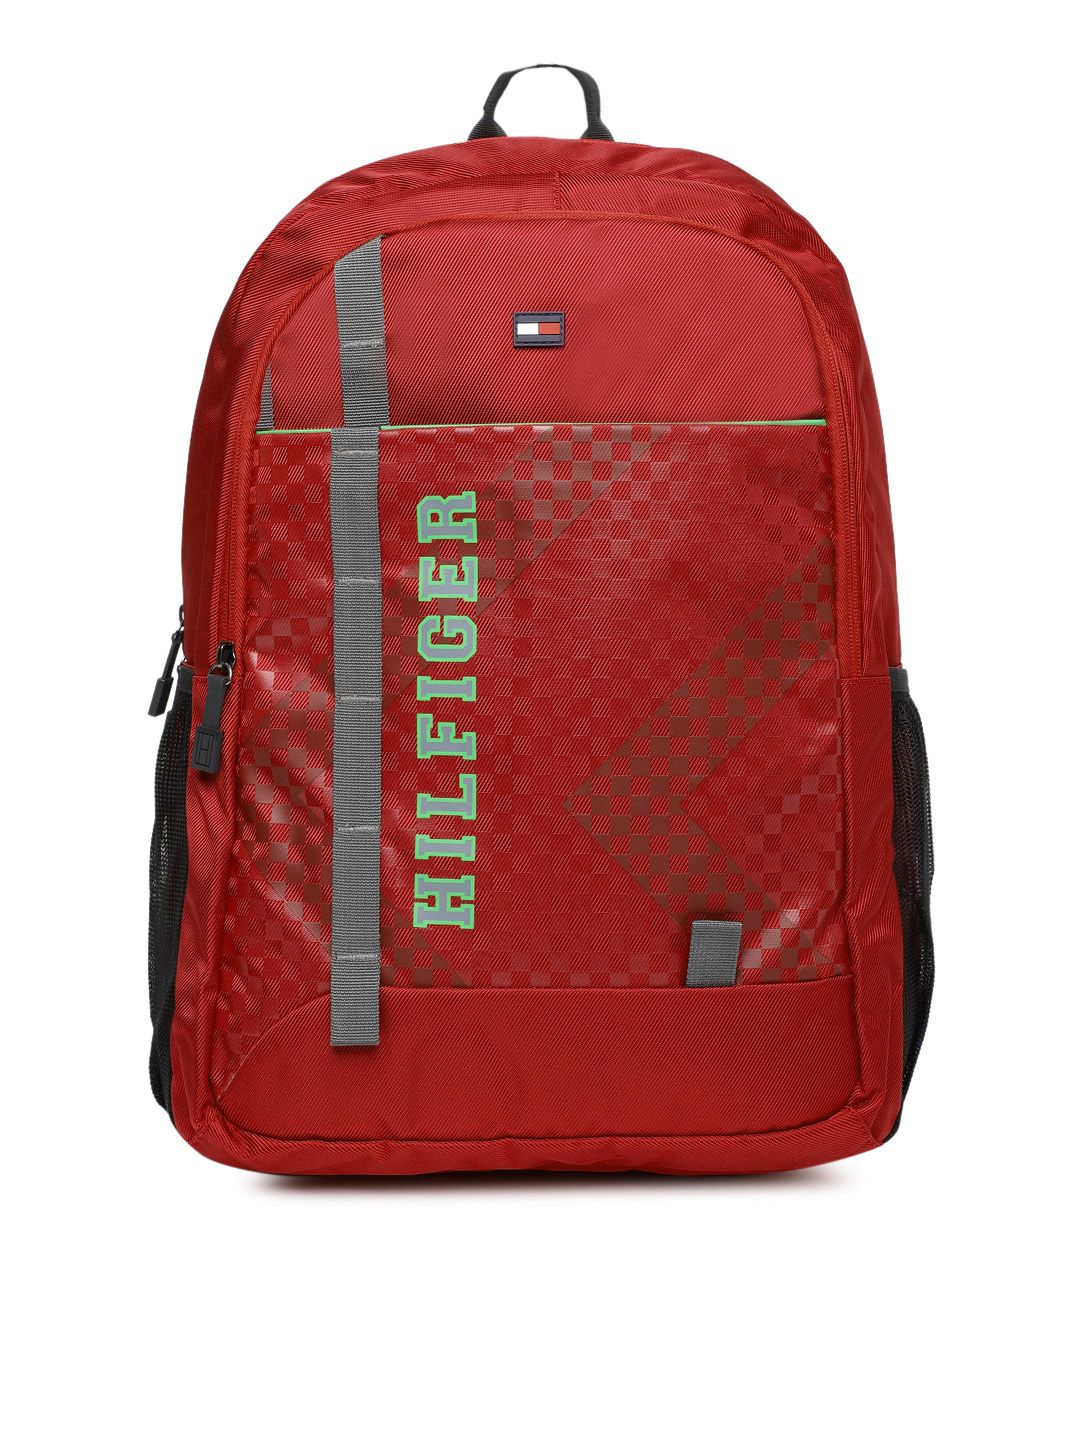 Tommy Hilfiger Unisex Red Printed Backpack Price in India